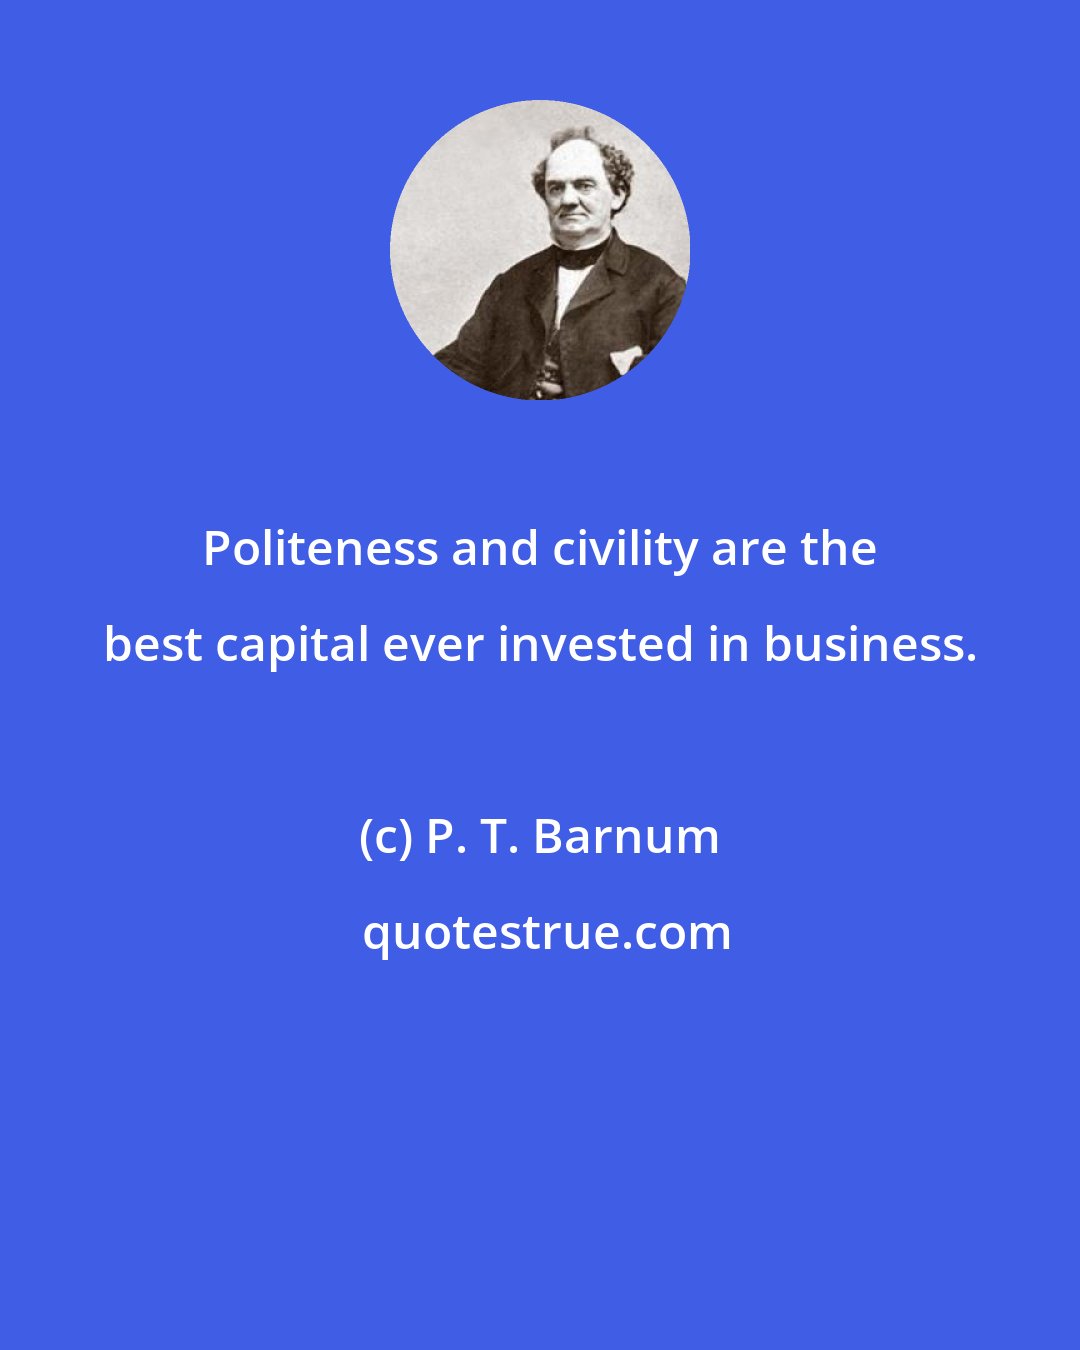 P. T. Barnum: Politeness and civility are the best capital ever invested in business.